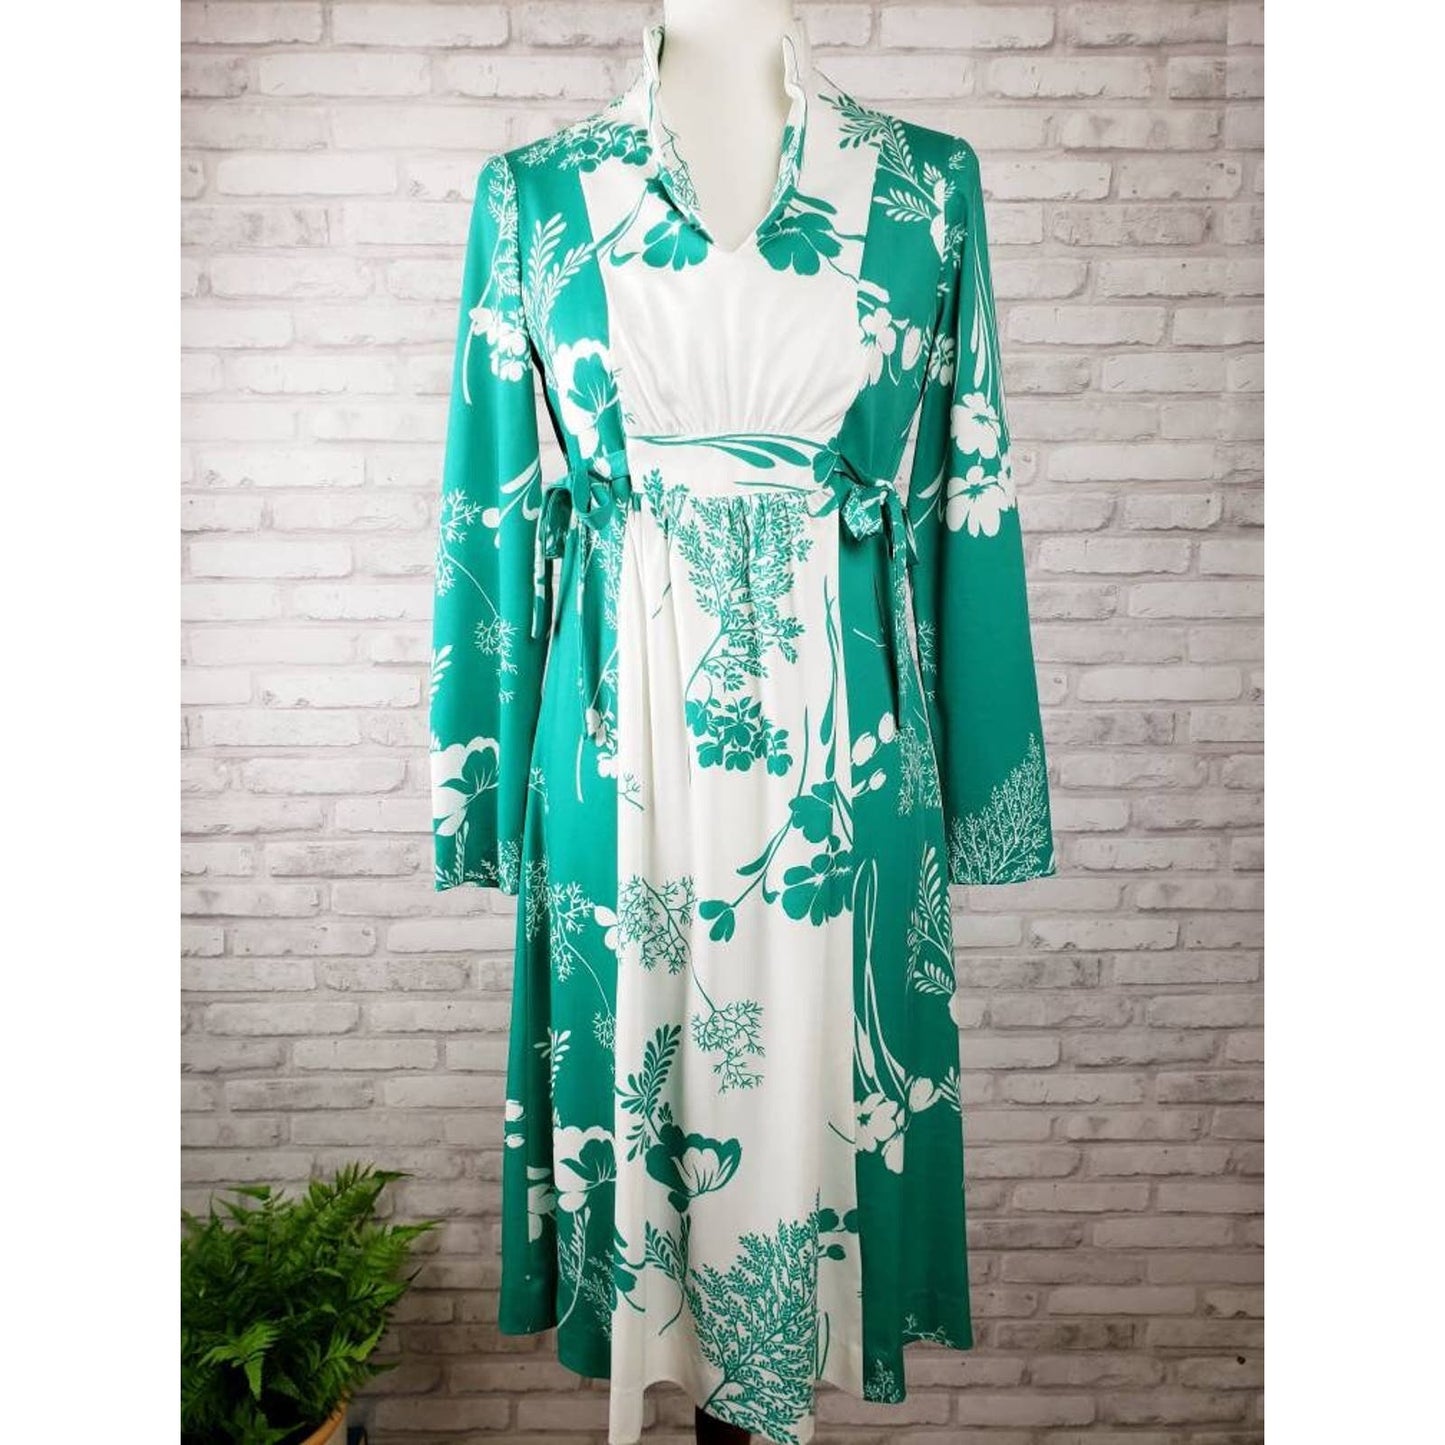 Yves Jennet dress jade green floral dress with contrast panel and cute side ties, size M 38-inch bust, 1970s double knit polyester